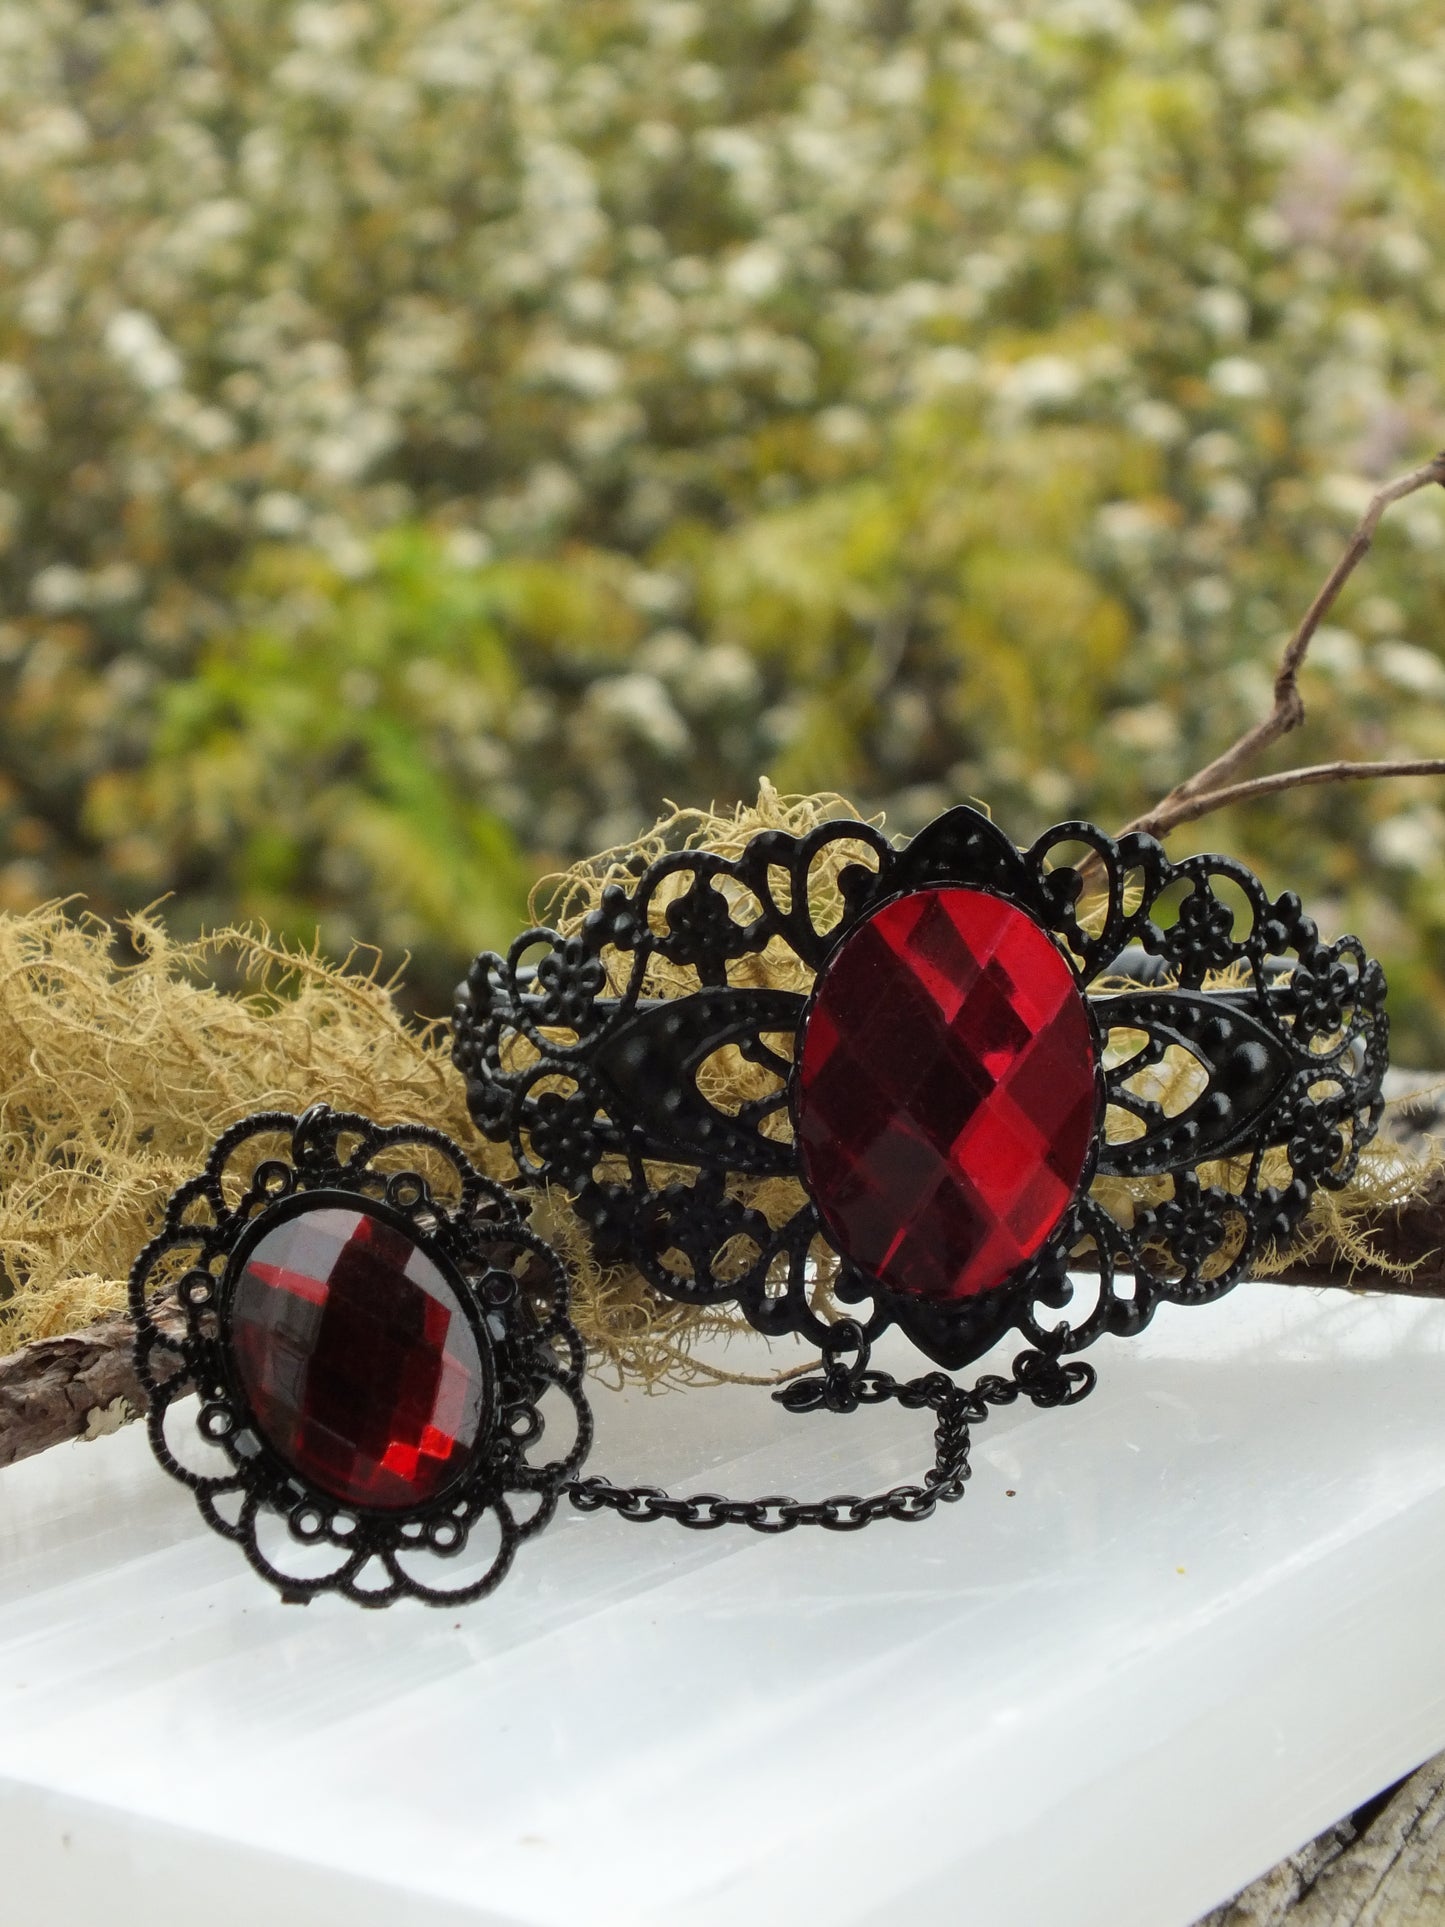 Blood Red Gothic Costume Ring